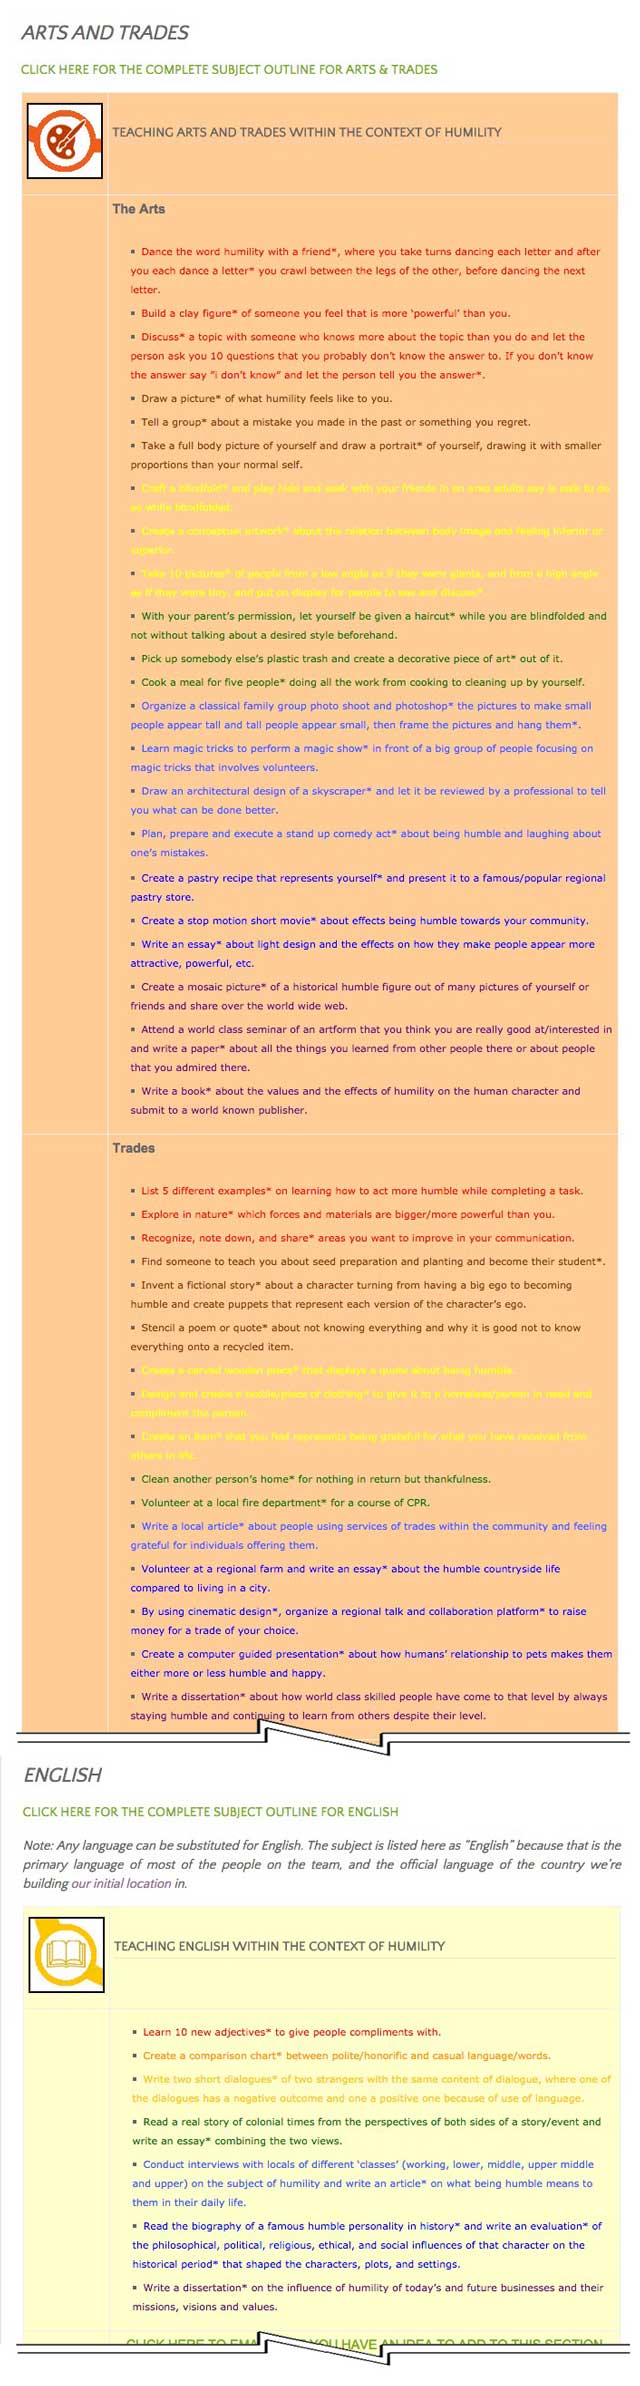 This last week the core team transferred the first 25% of the written content for the Humility Lesson Plan to the website, as you see here. This lesson plan purposed to teach all subjects, to all learning levels, in any learning environment, using the central theme of “Humility” is now 25% completed on our website.